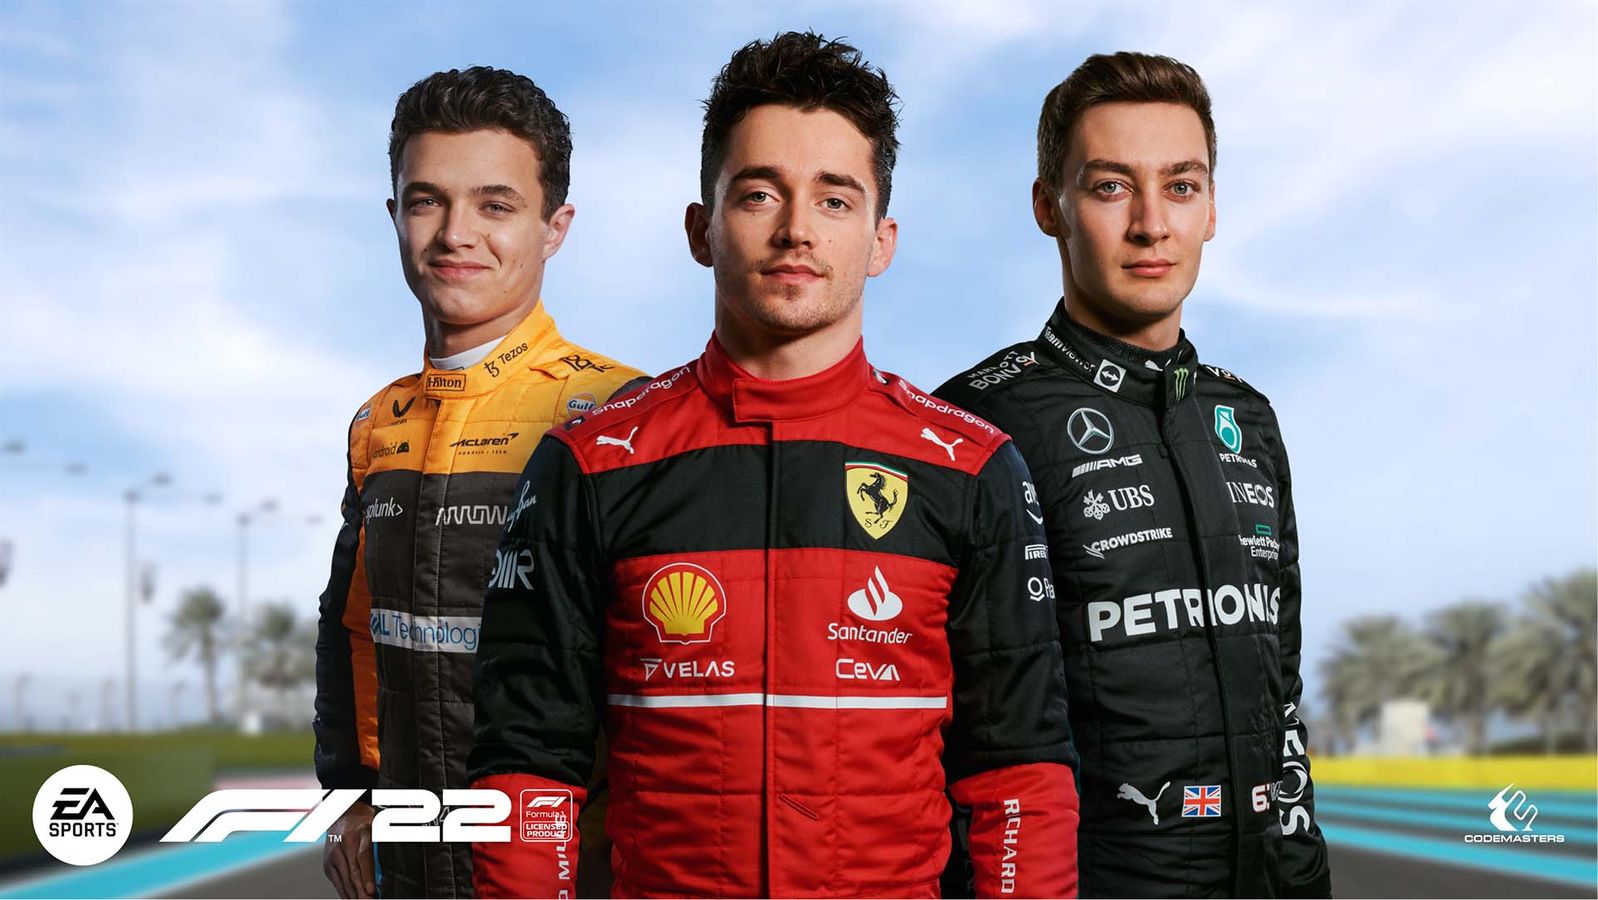 F1 22 drivers Charles LeClerc, George Russell, Lando Norris